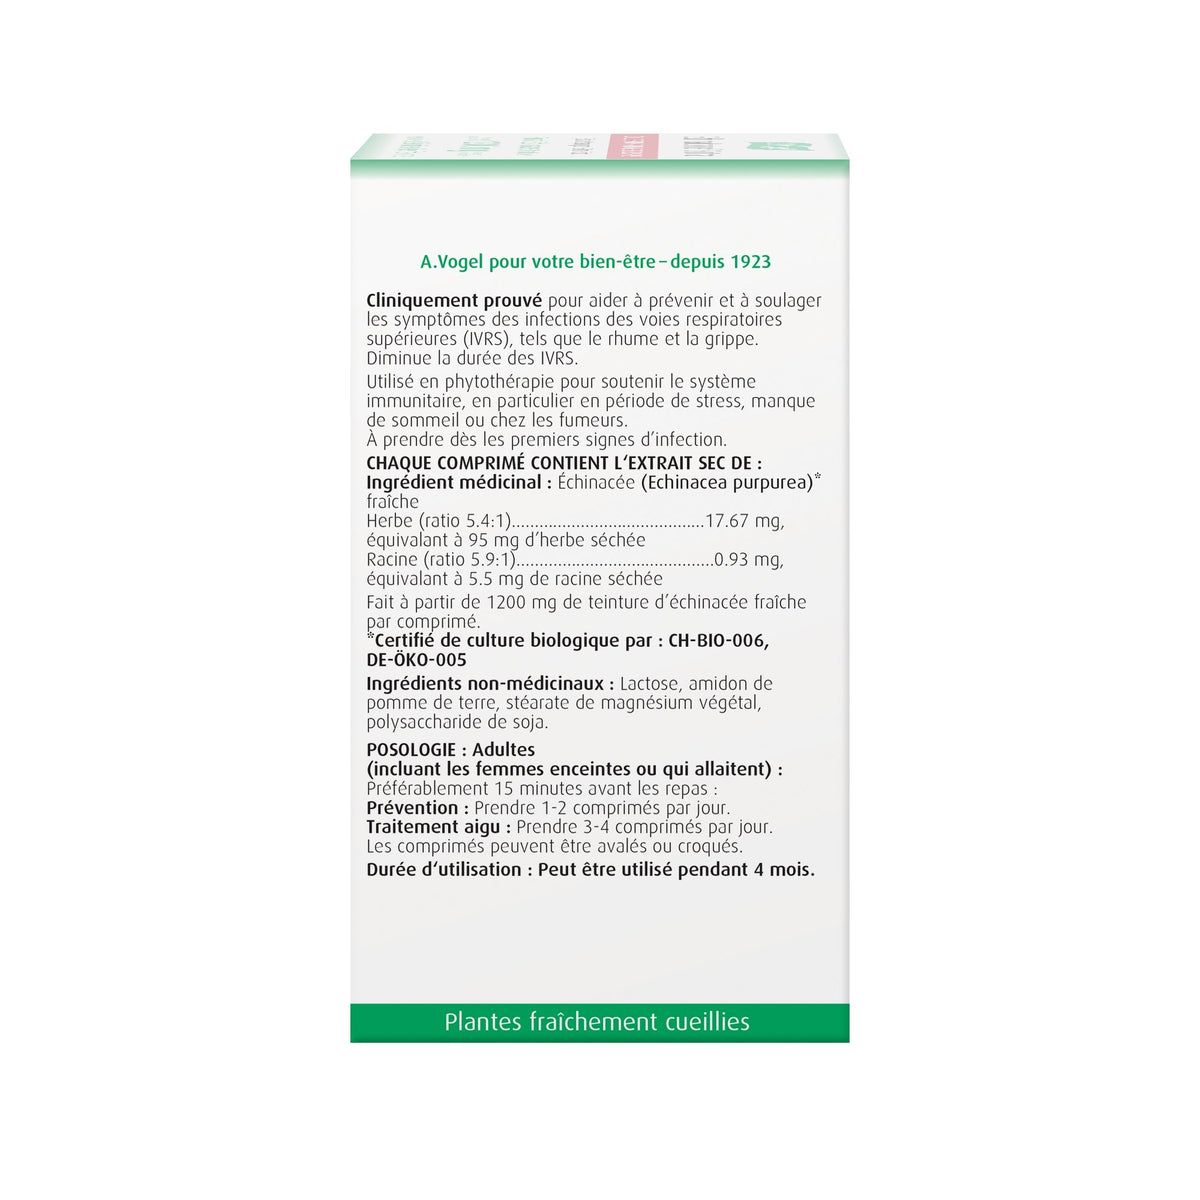 Echinaforce Extra Tablets - Immune System Support - A.Vogel Canada